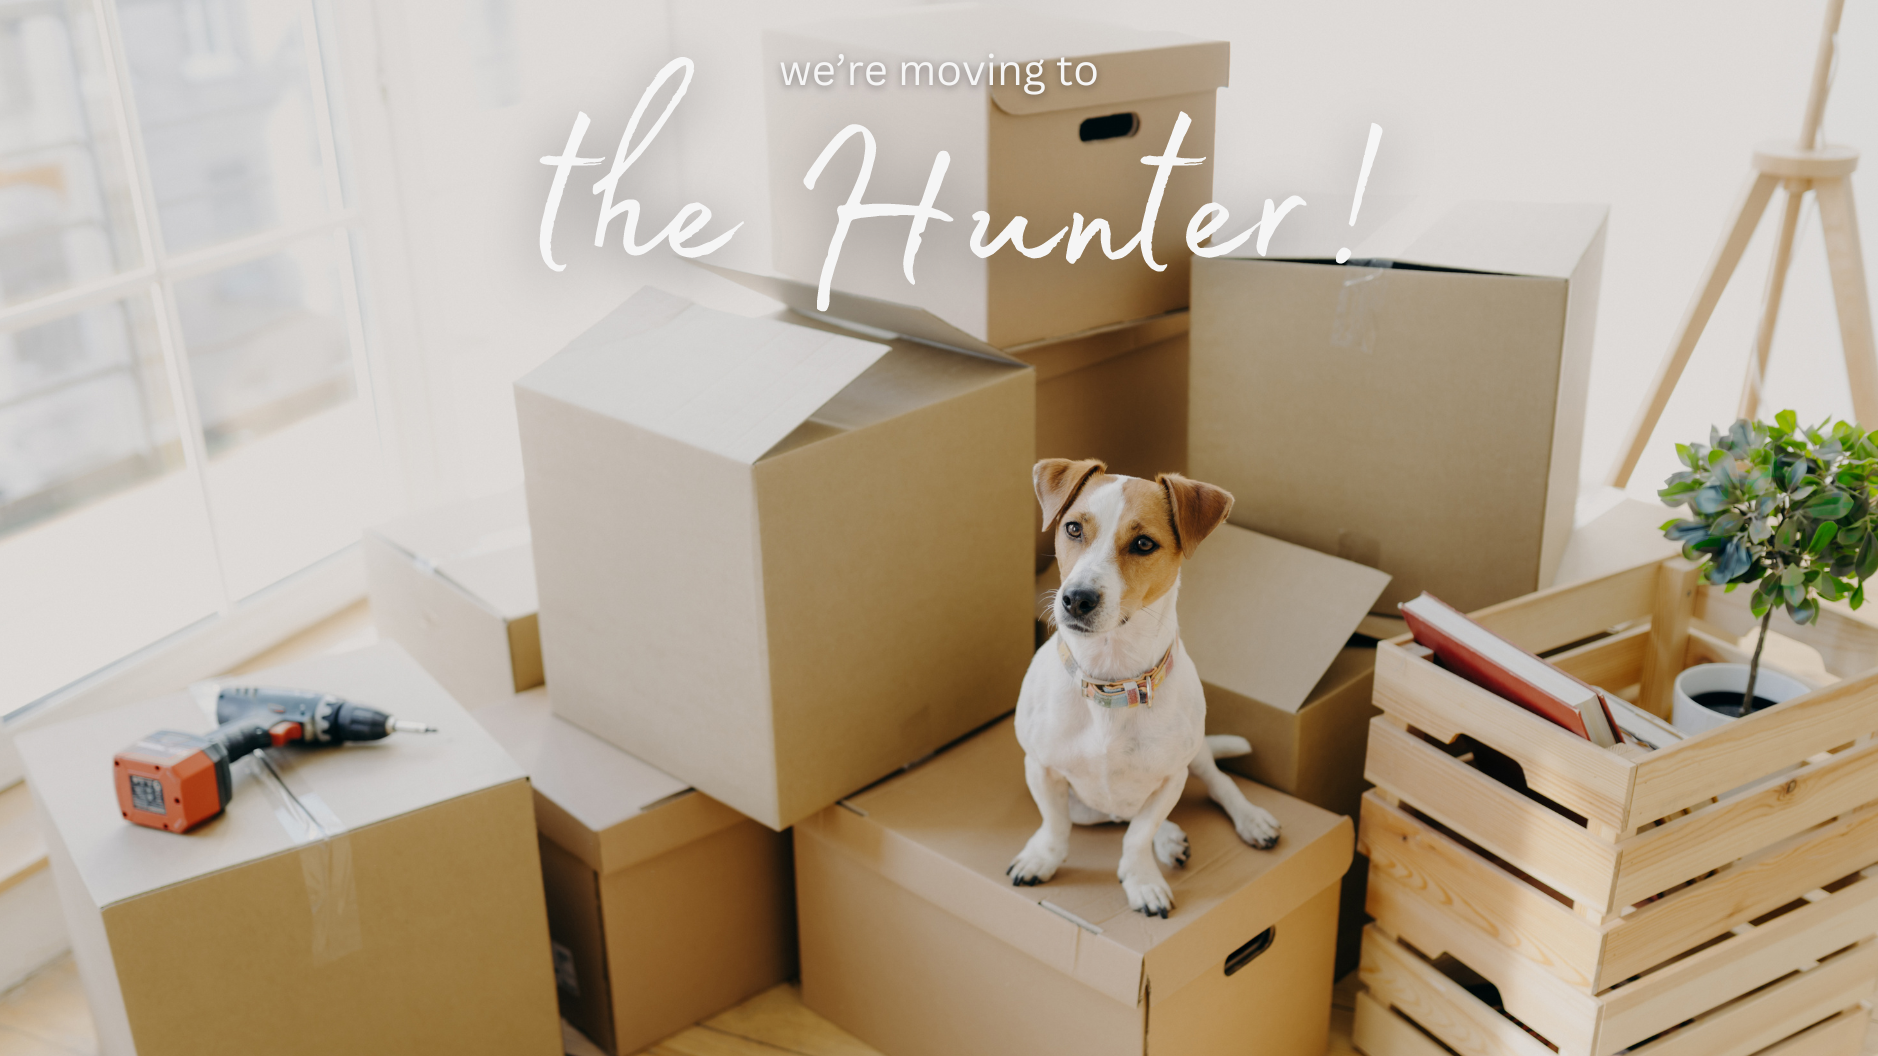 We're moving to the Hunter!